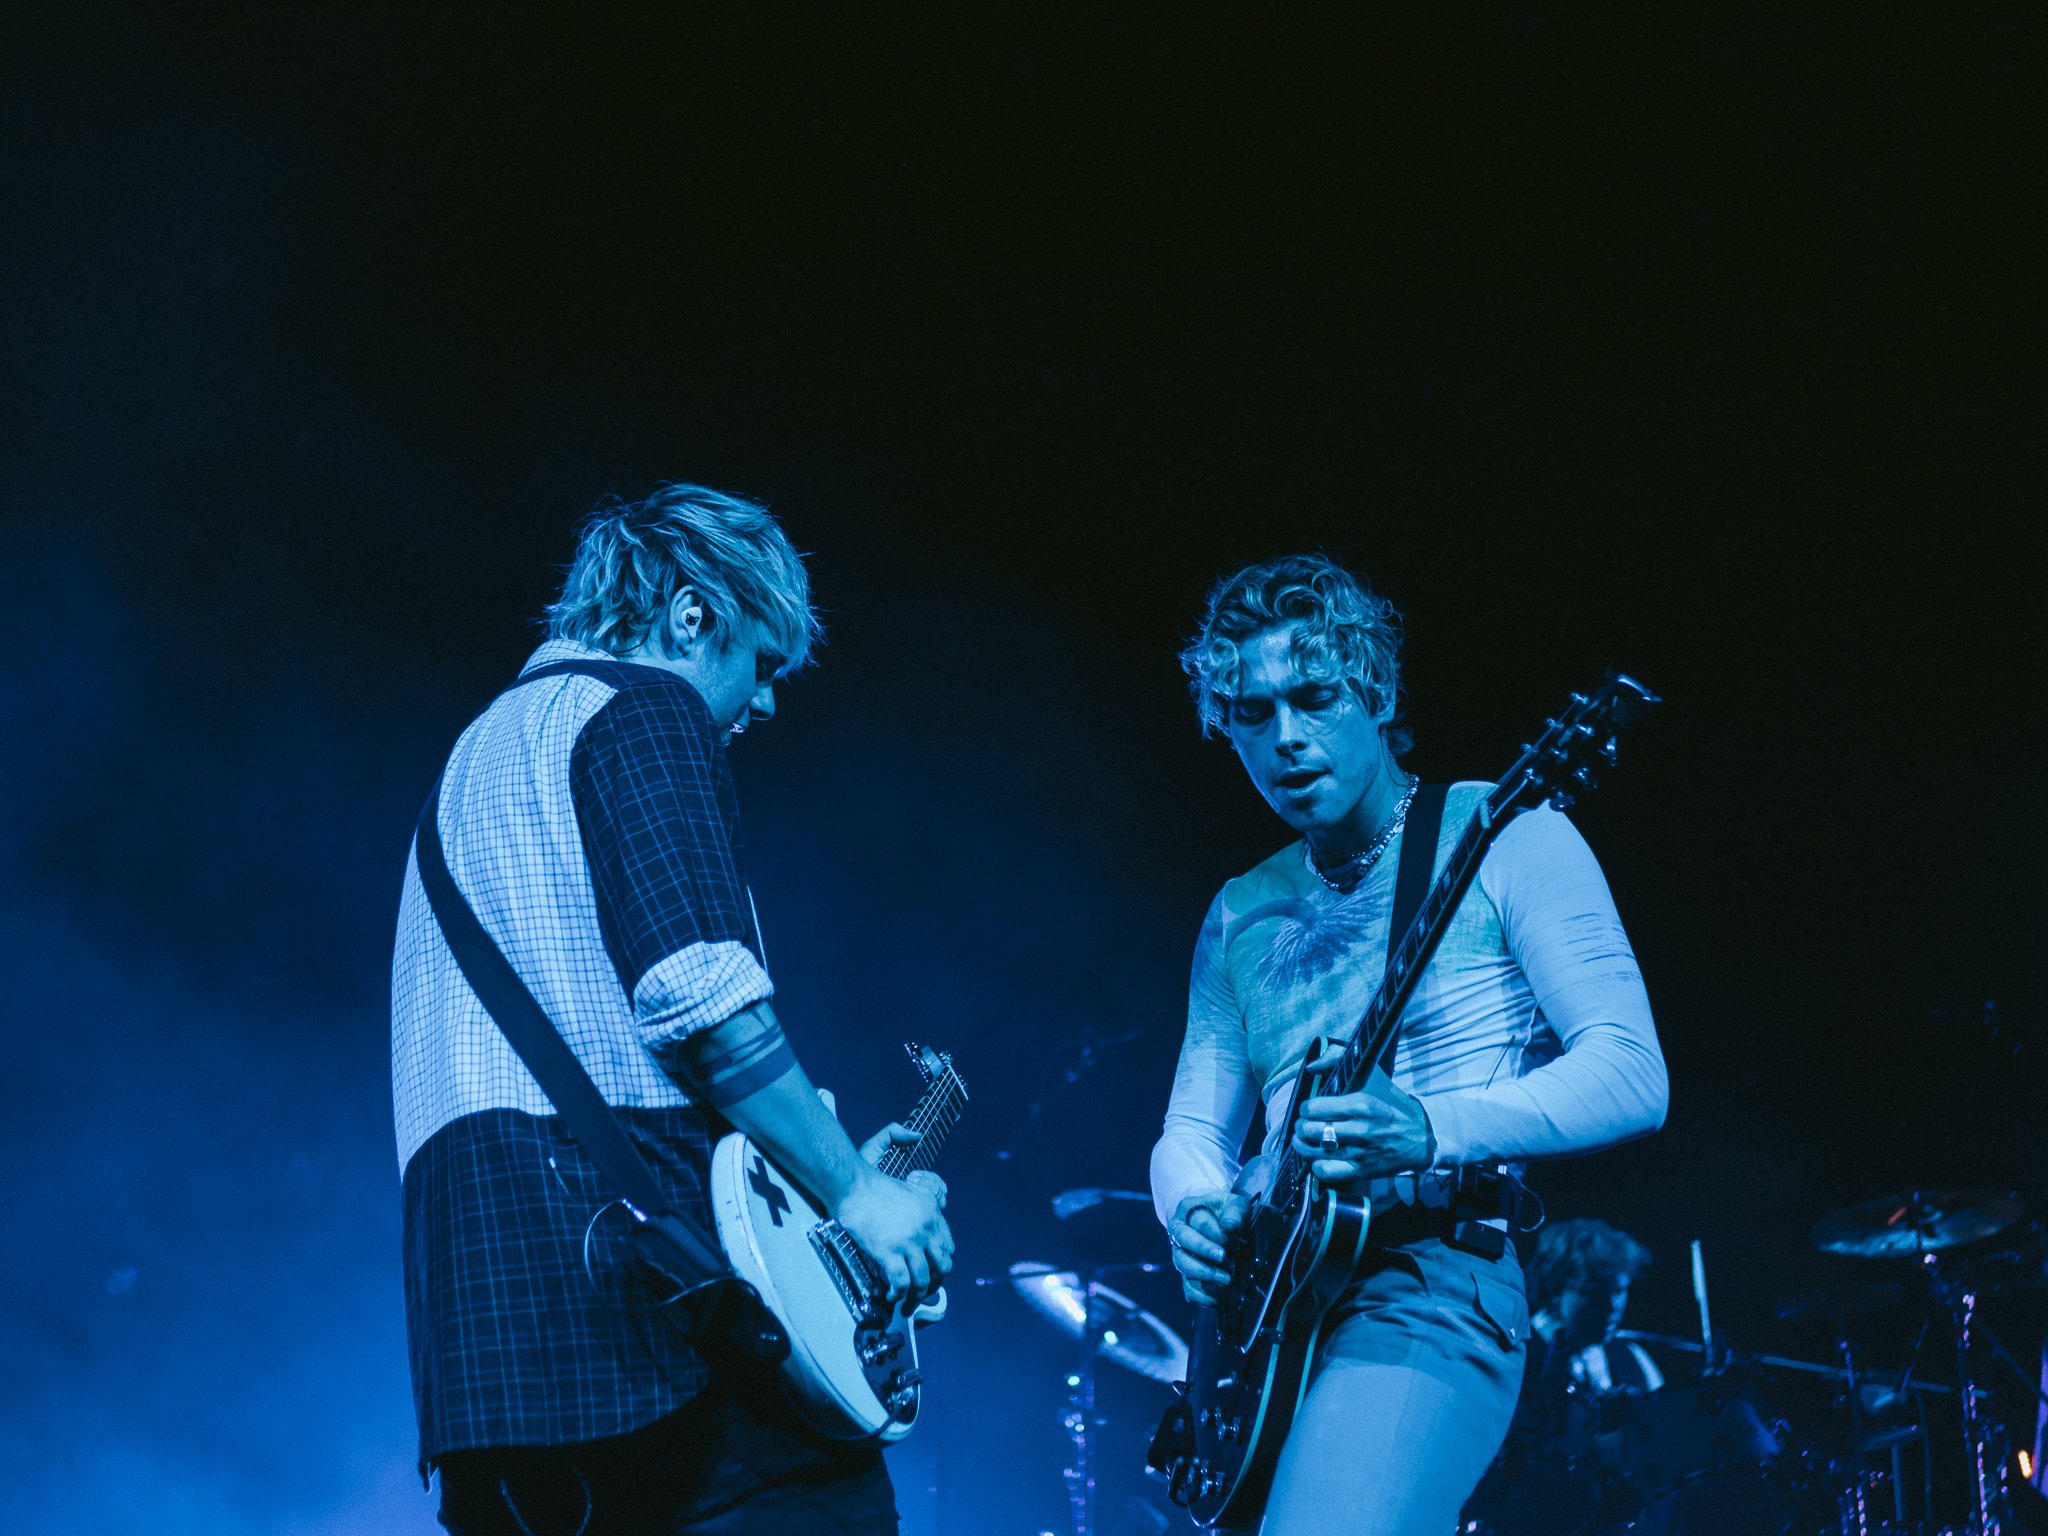  Hemmings and Clifford play together on stage. 